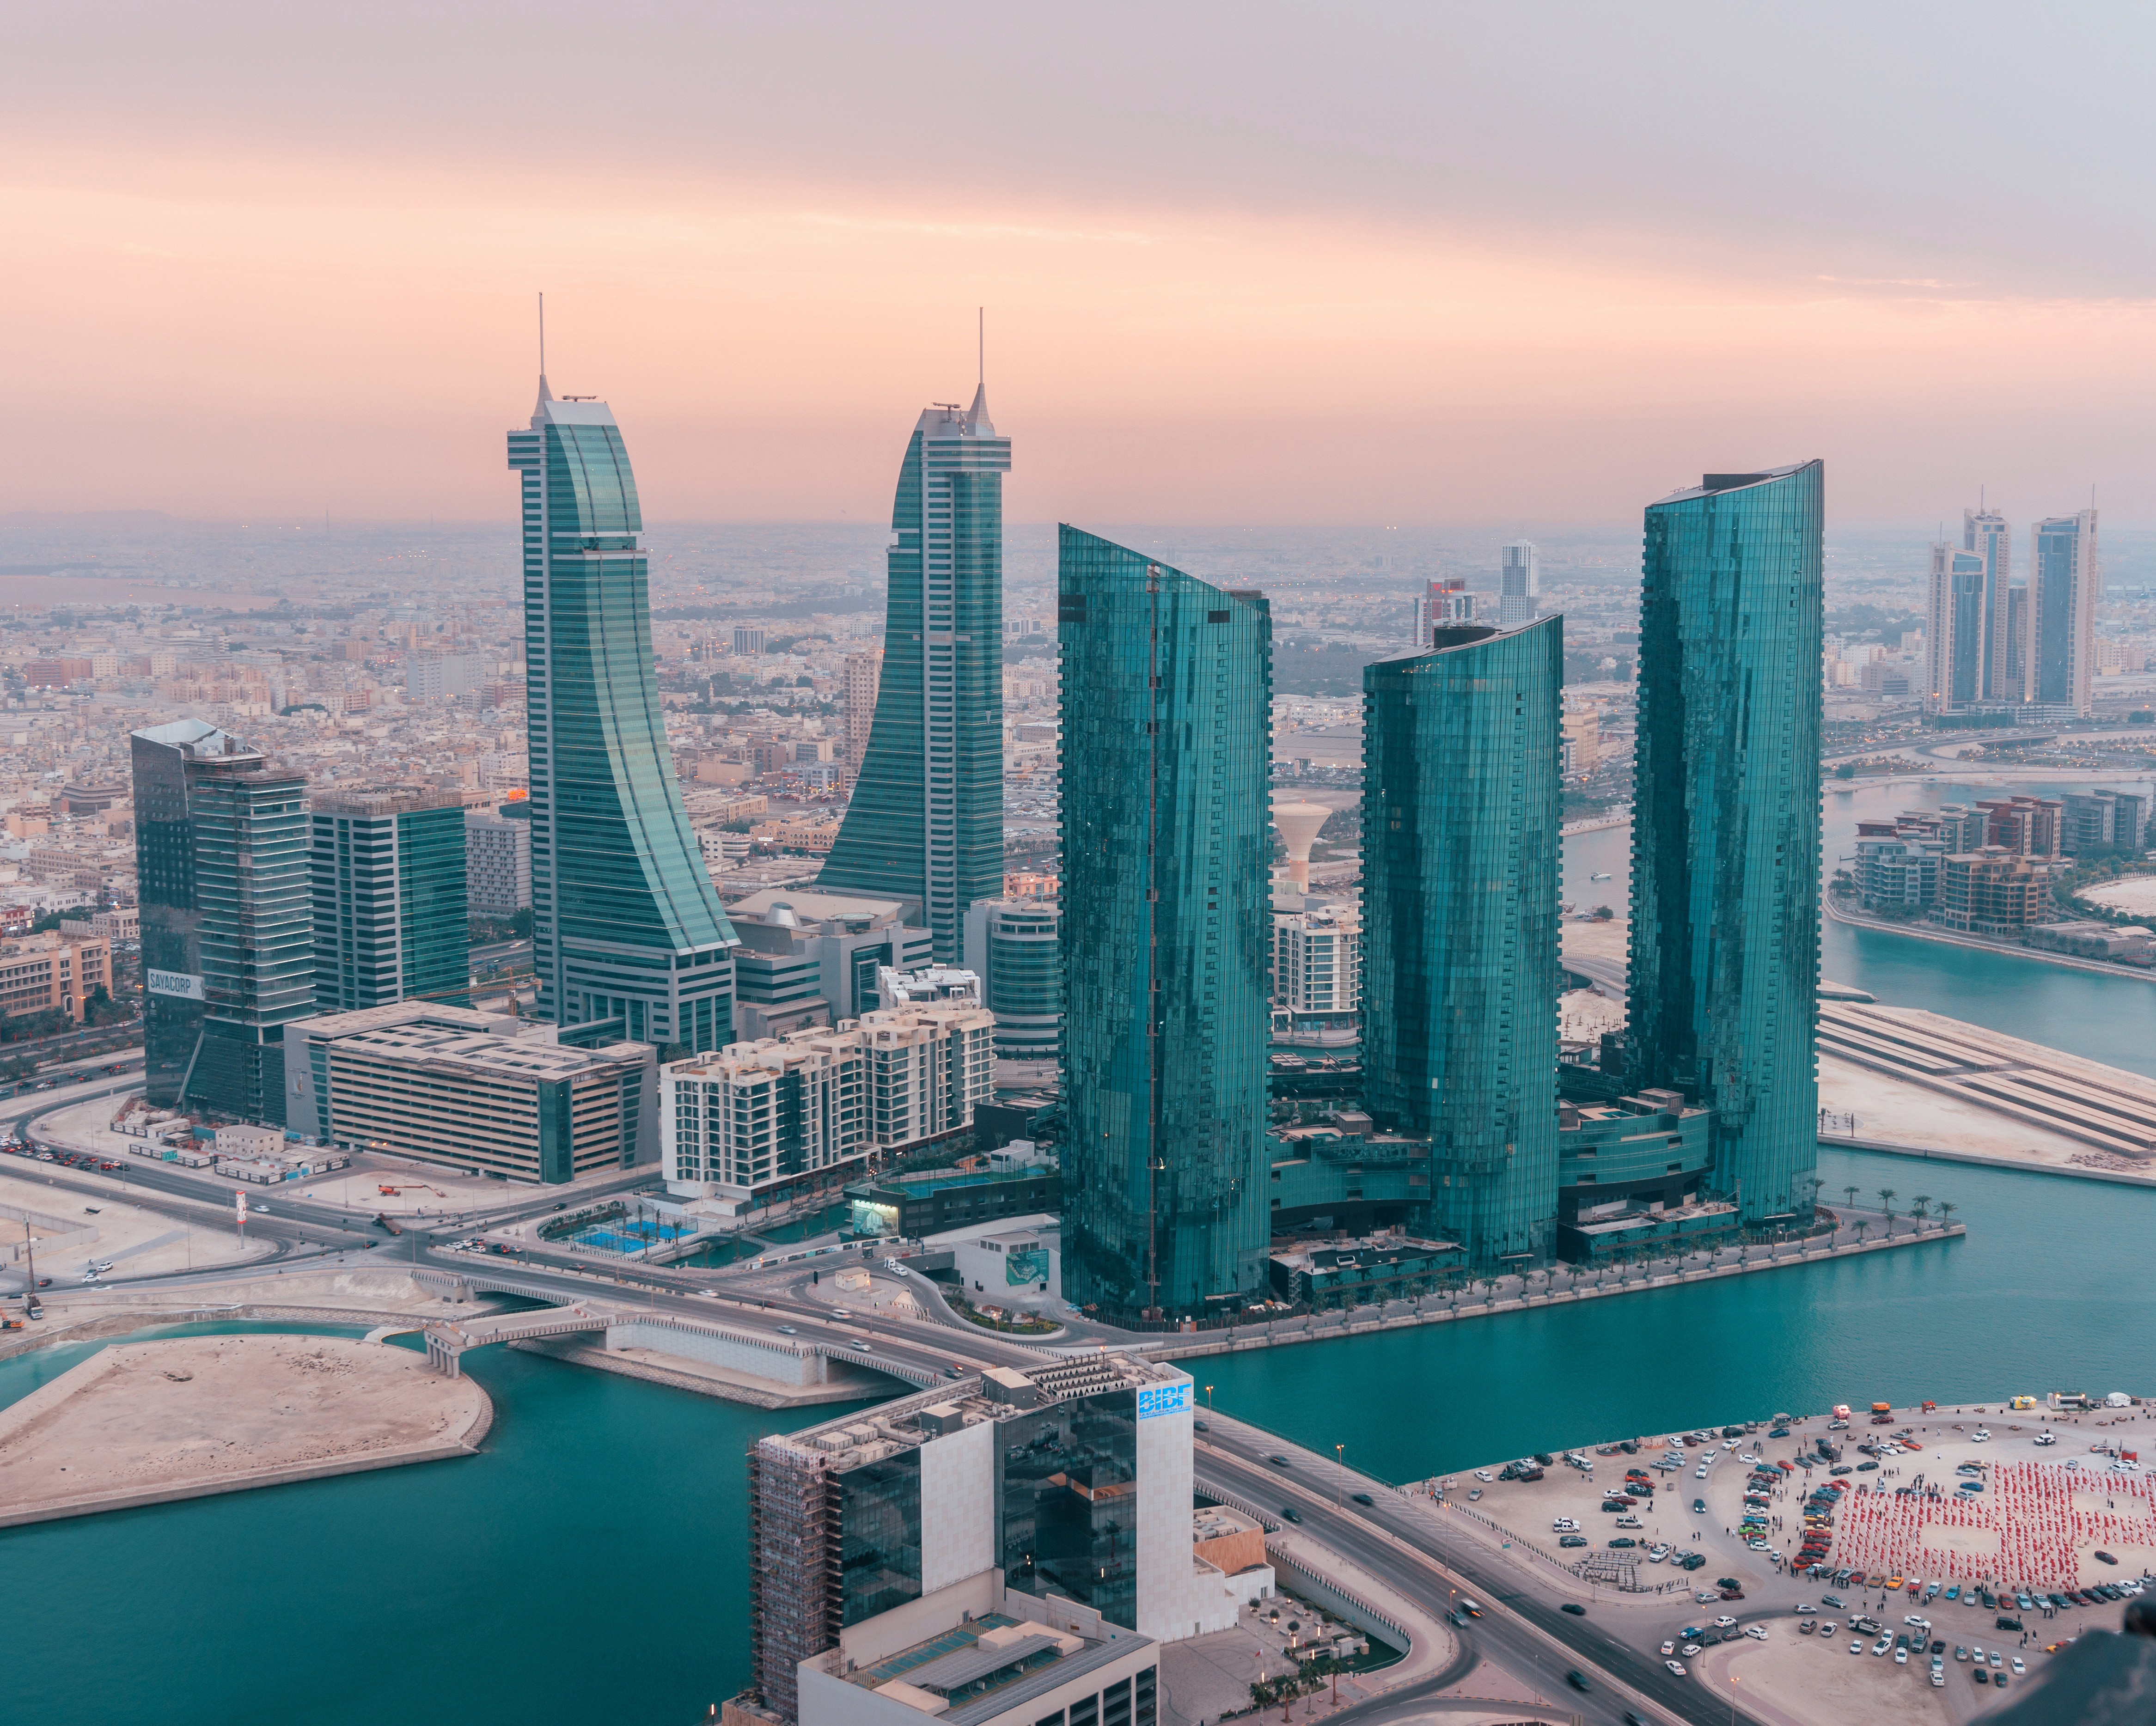 A cityscape of Bahrain in the Middle East